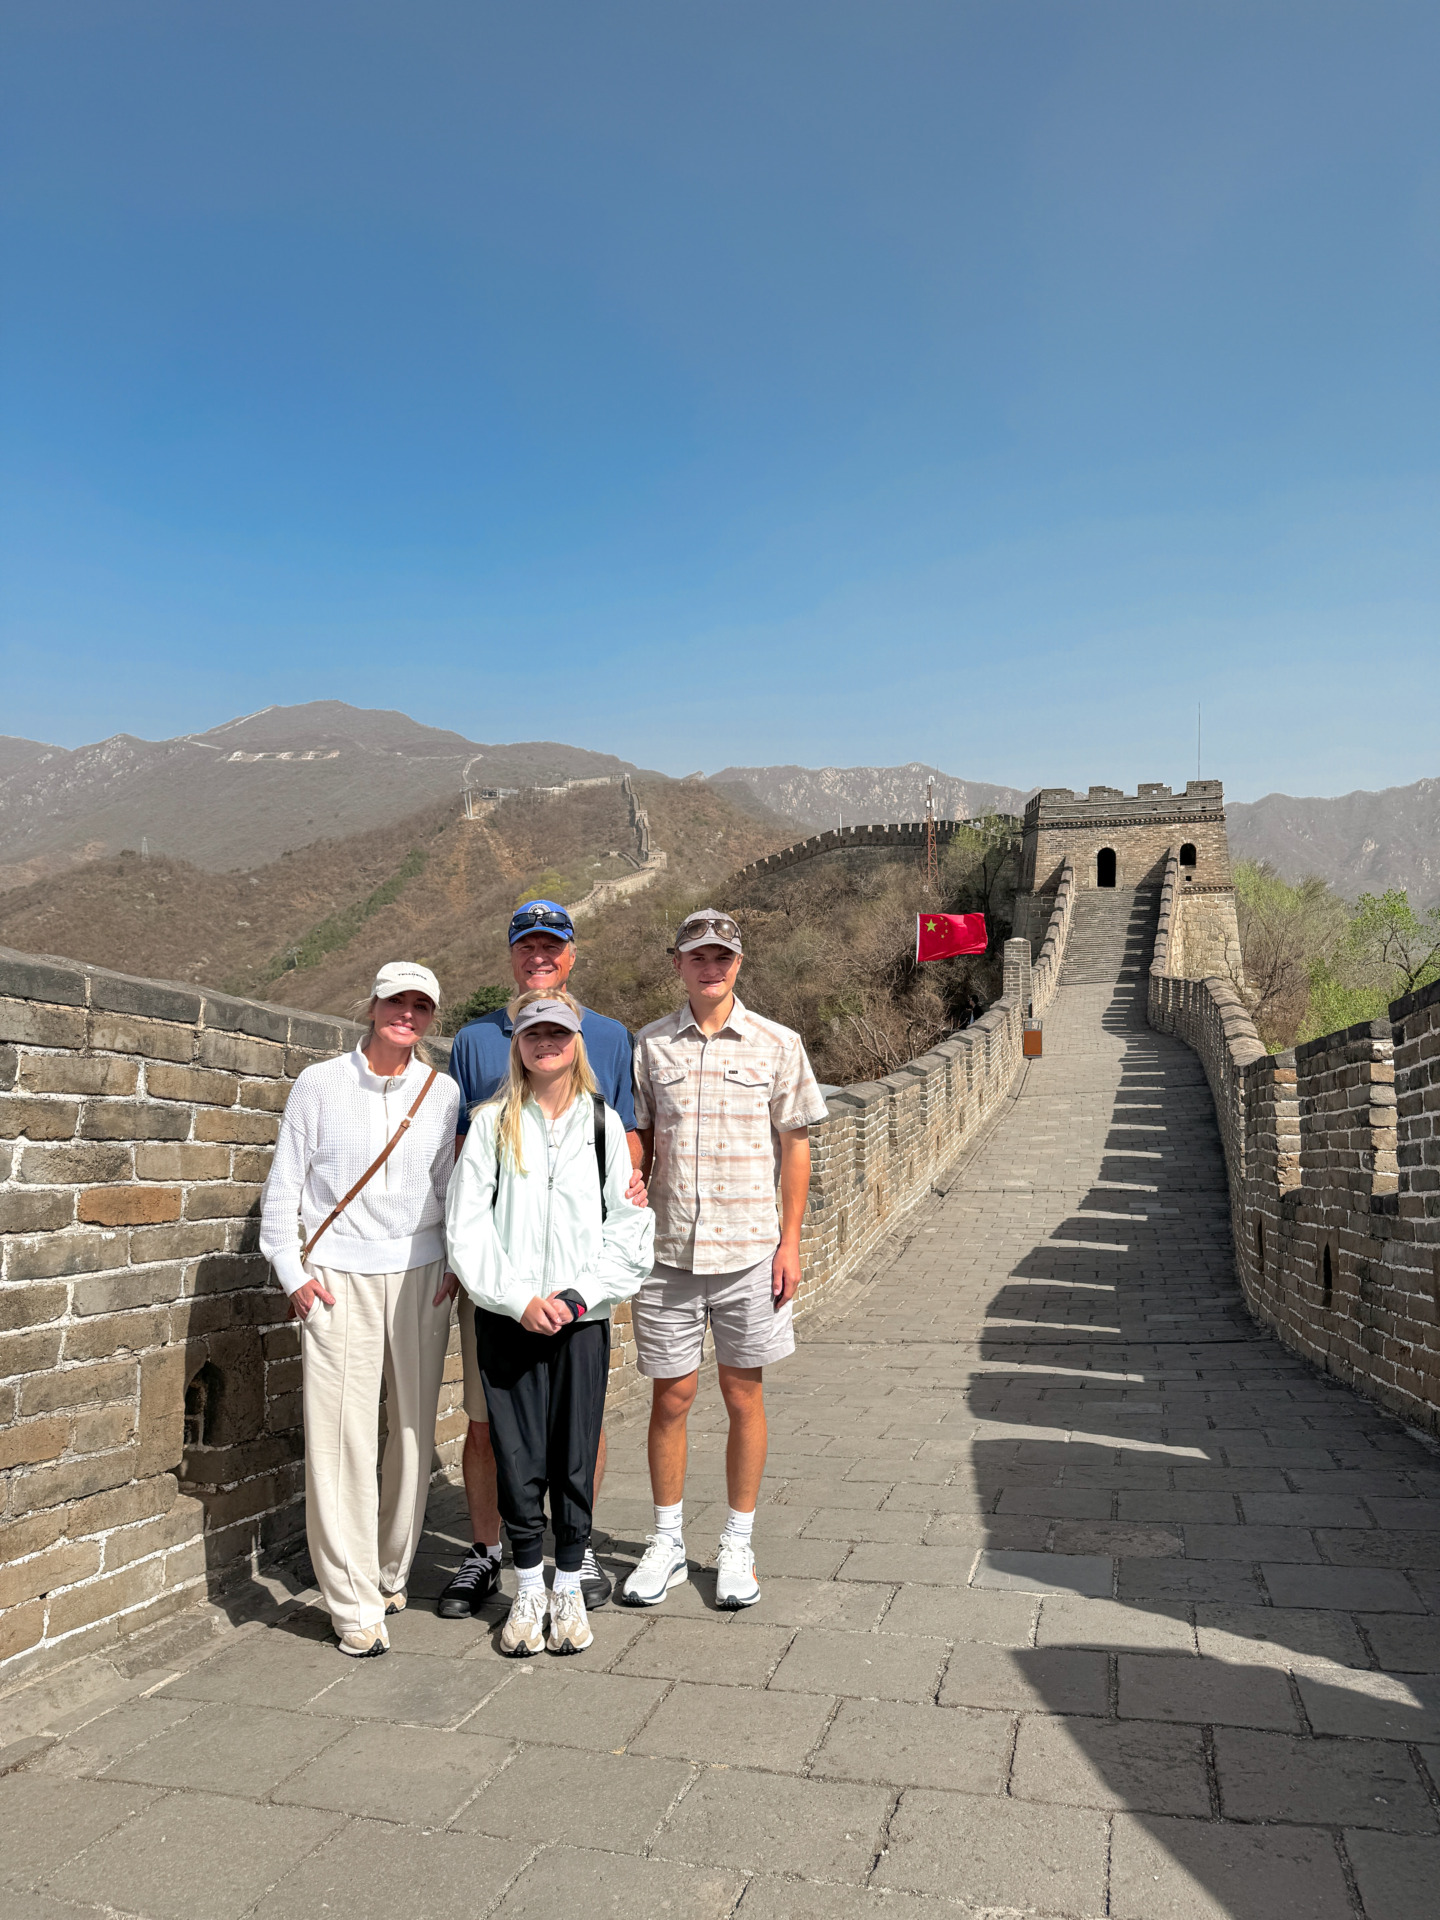 Busbee's at the Great wall of china